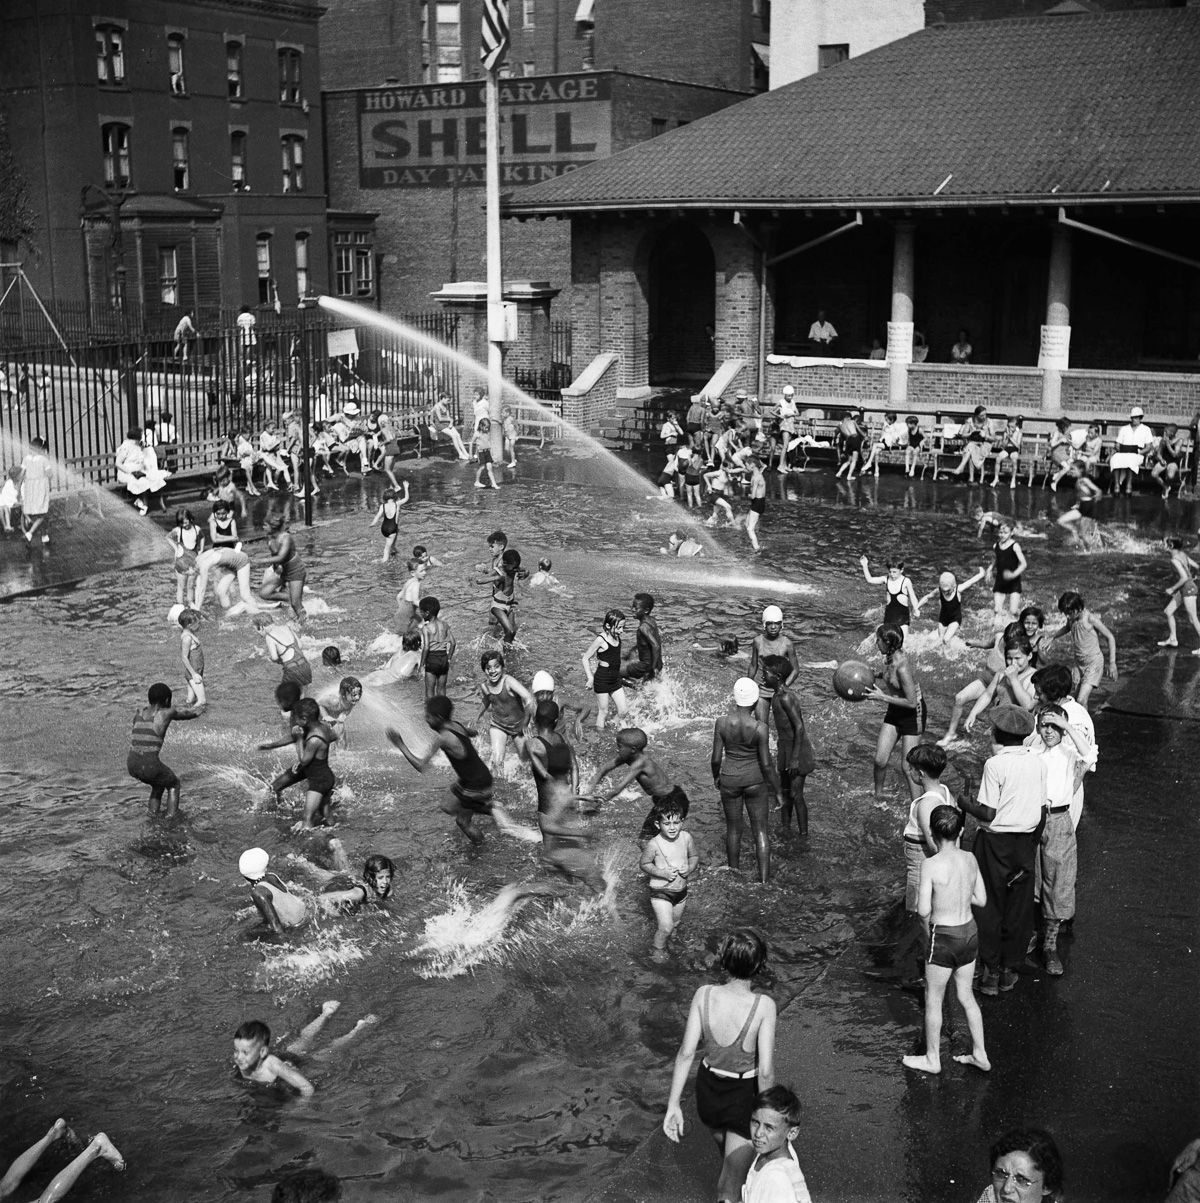 Vintage Photos Of Swimming In New York's Open Air Pools - Flashbak